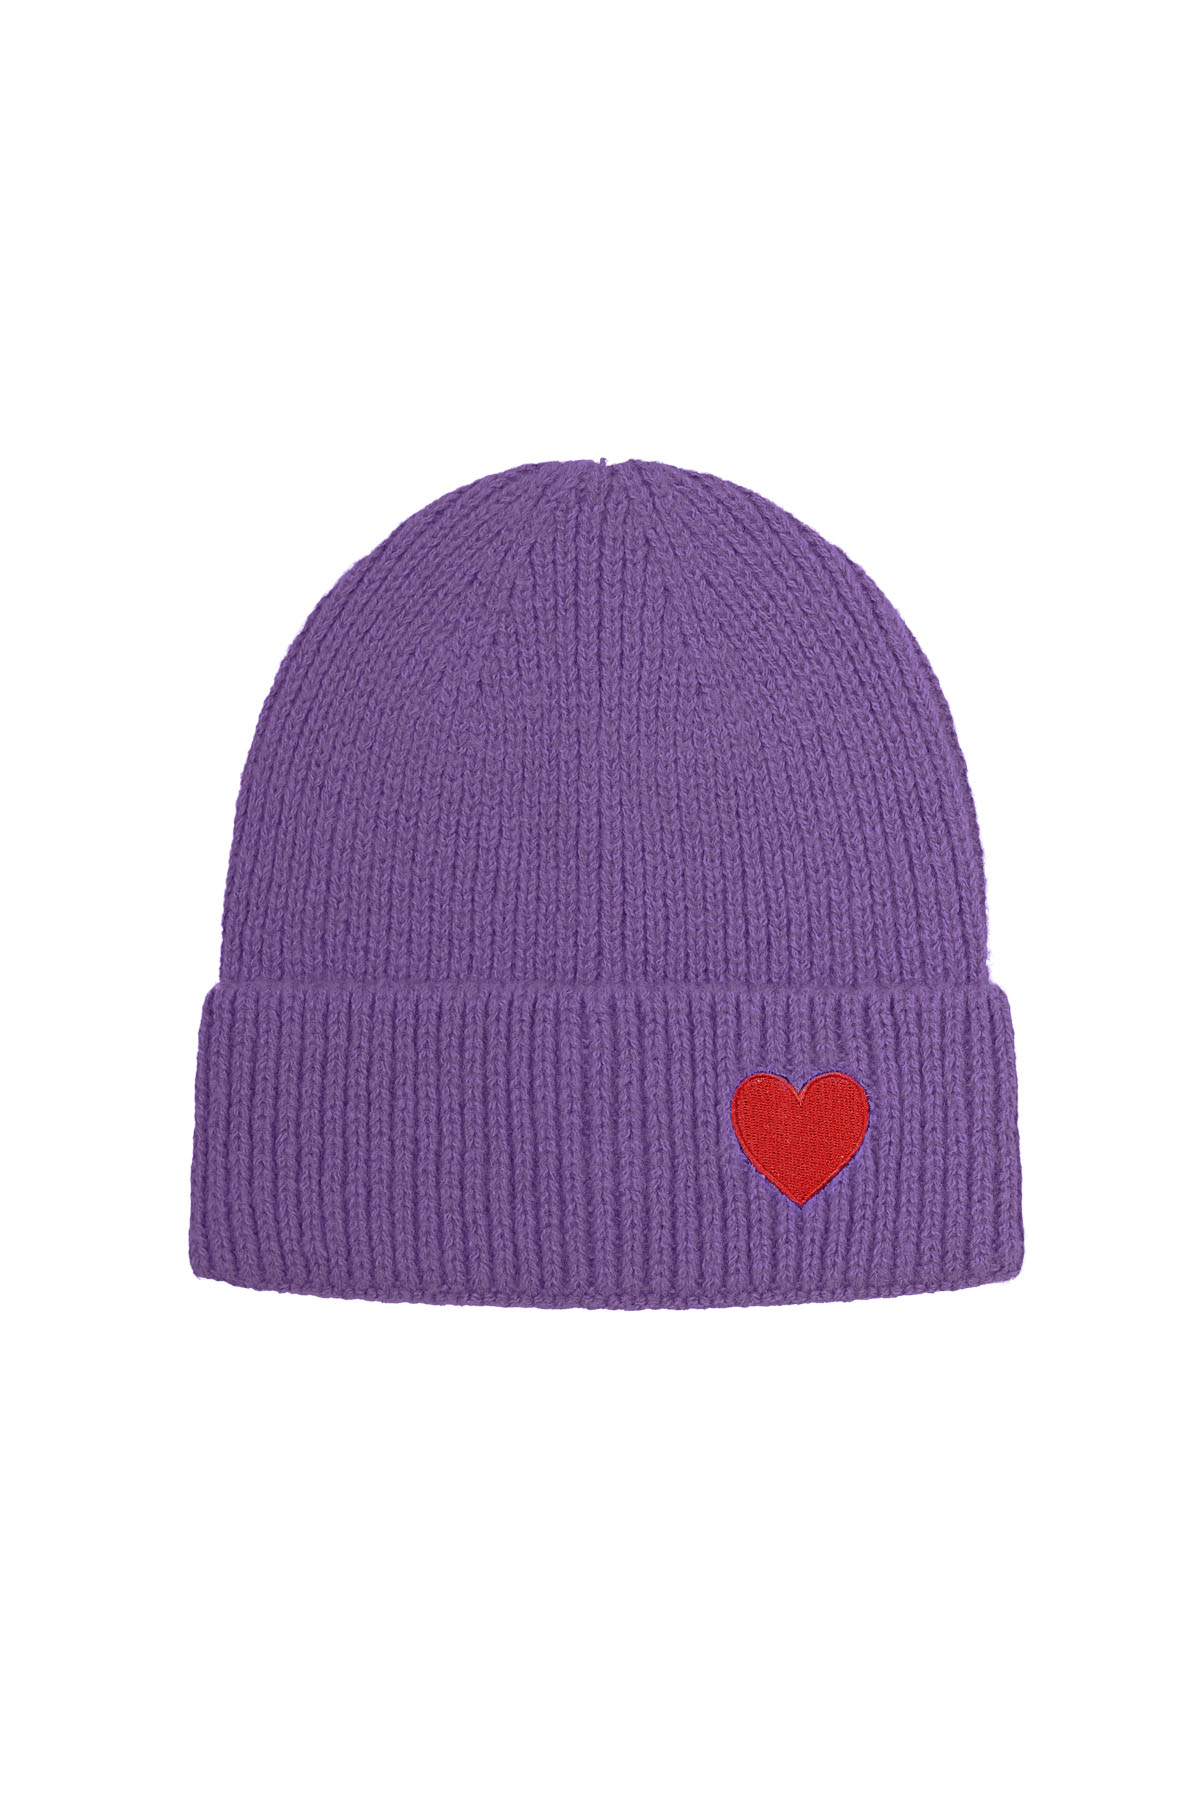 Hat with heart detail - purple 